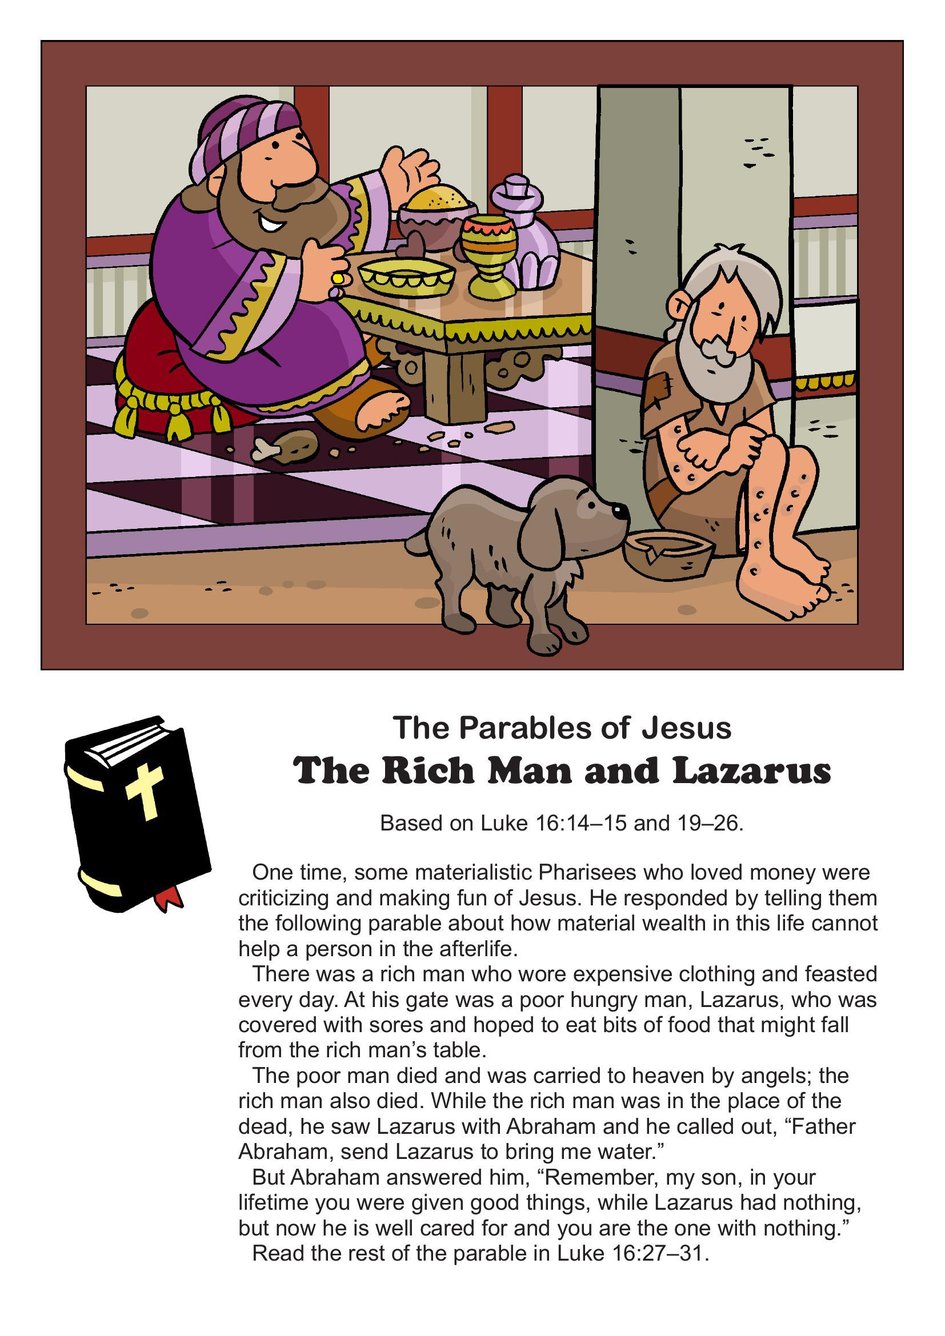 The Parables of Jesus: The Rich Man and Lazarus | My Wonder Studio